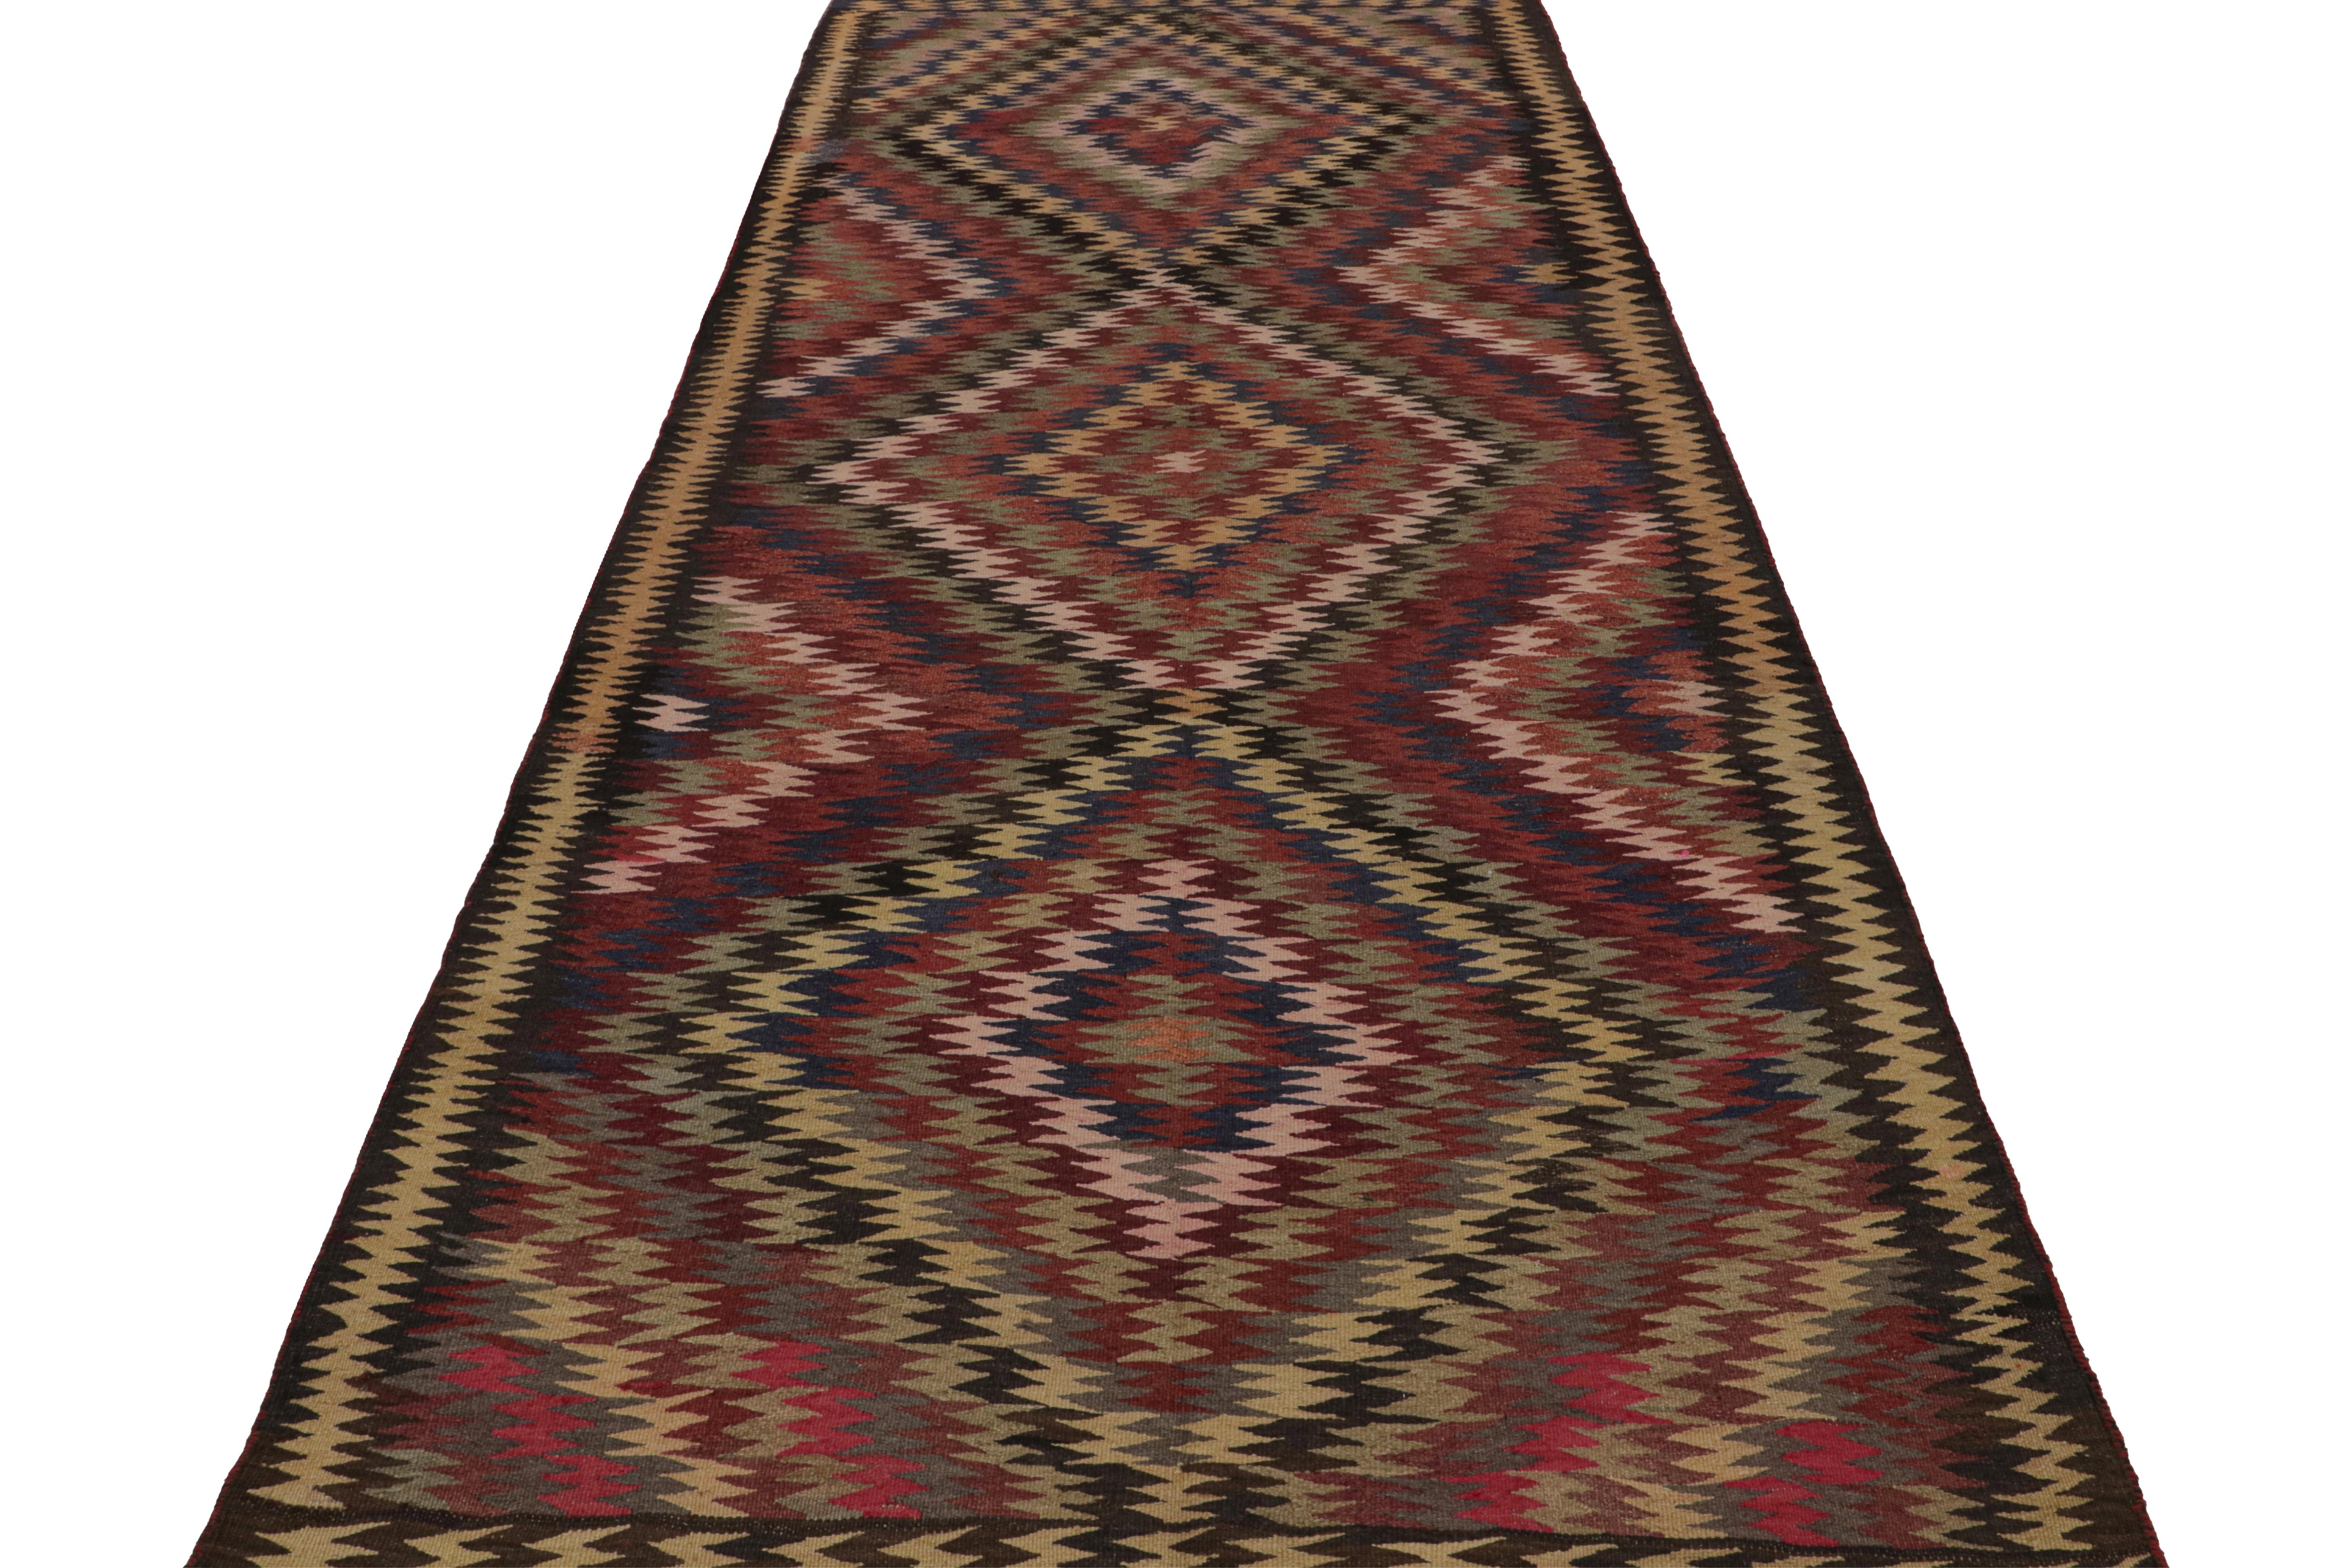 Tribal Vintage Persian Kilim in Polychromatic Patterns, from Rug & Kilim For Sale